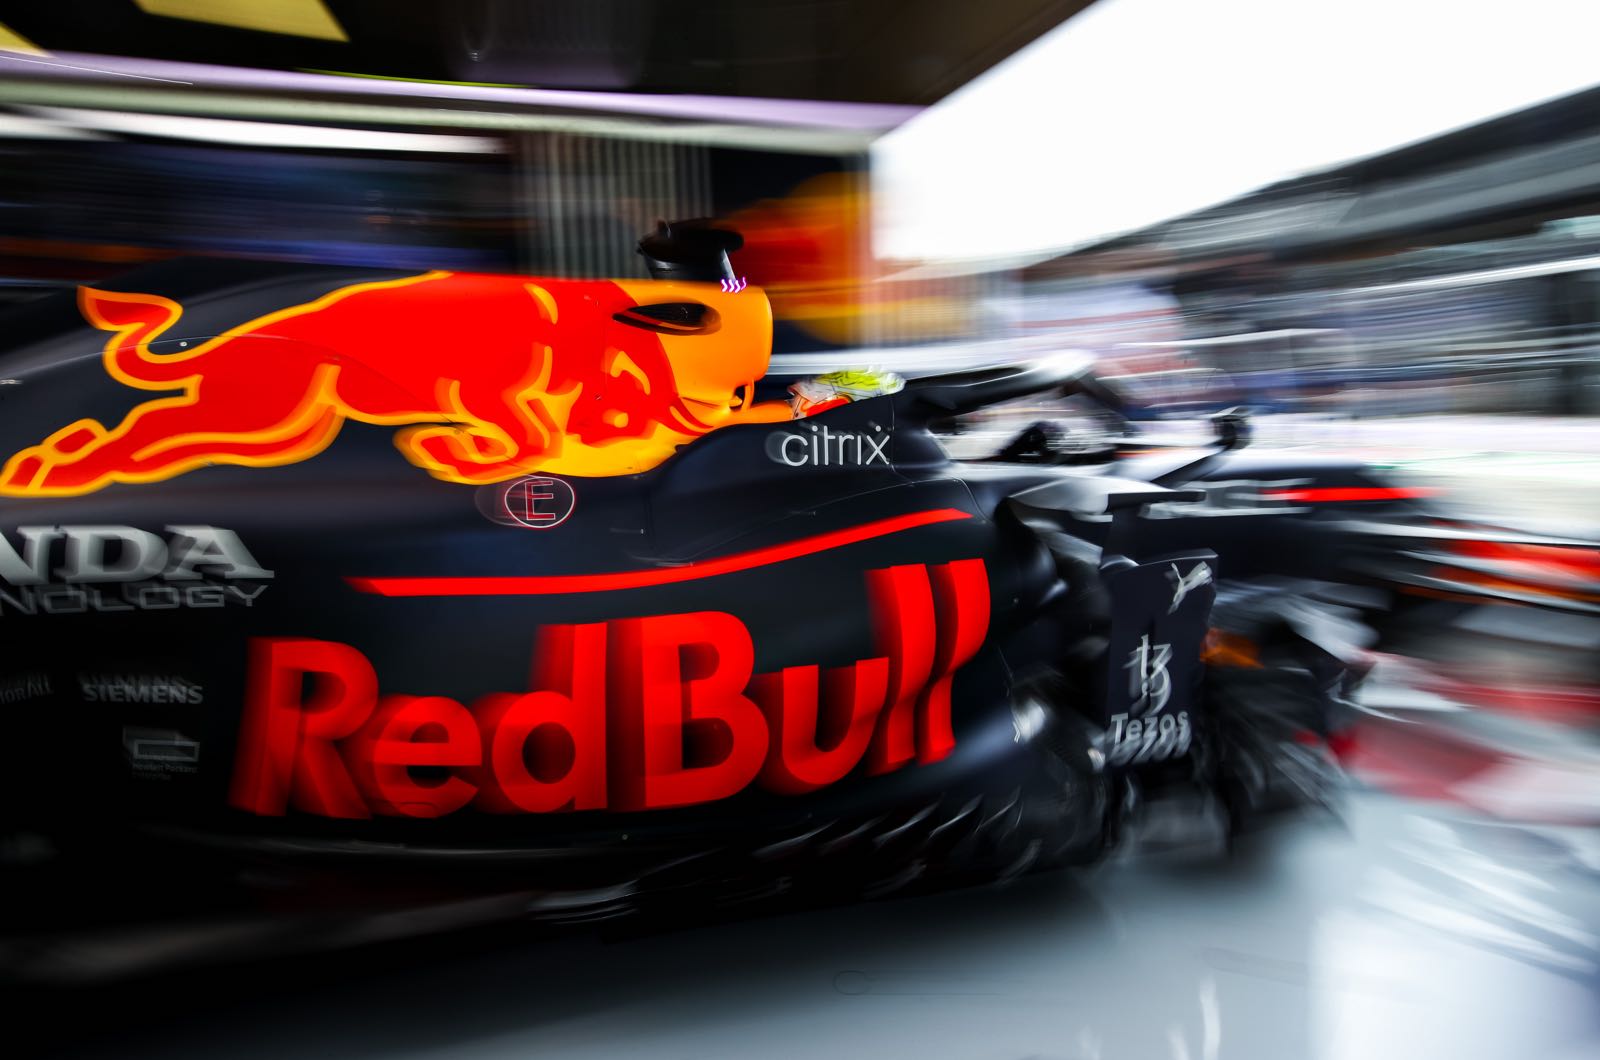 Catching Red Bull Almost Impossible For Mercedes